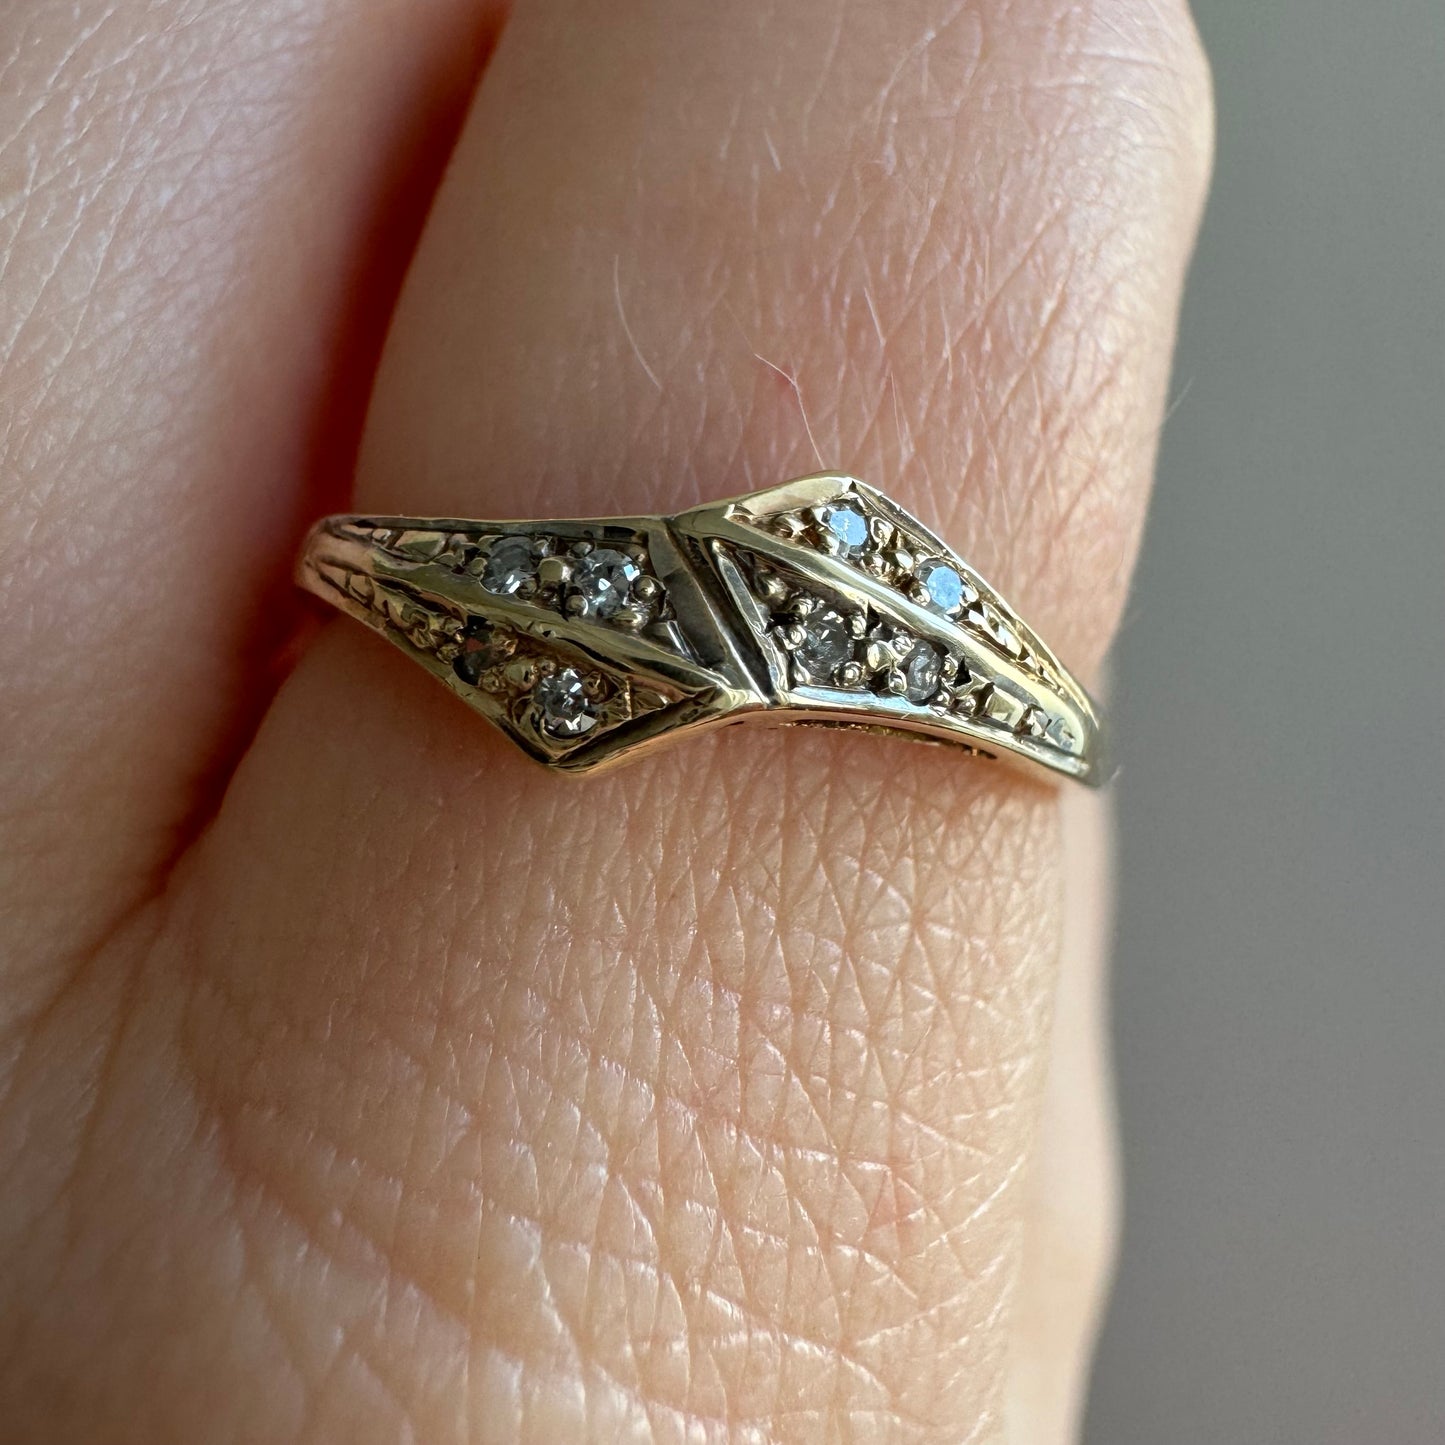 P R E - L O V E D // subtle serpents / 9k and diamond snake bypass ring / size 6.75